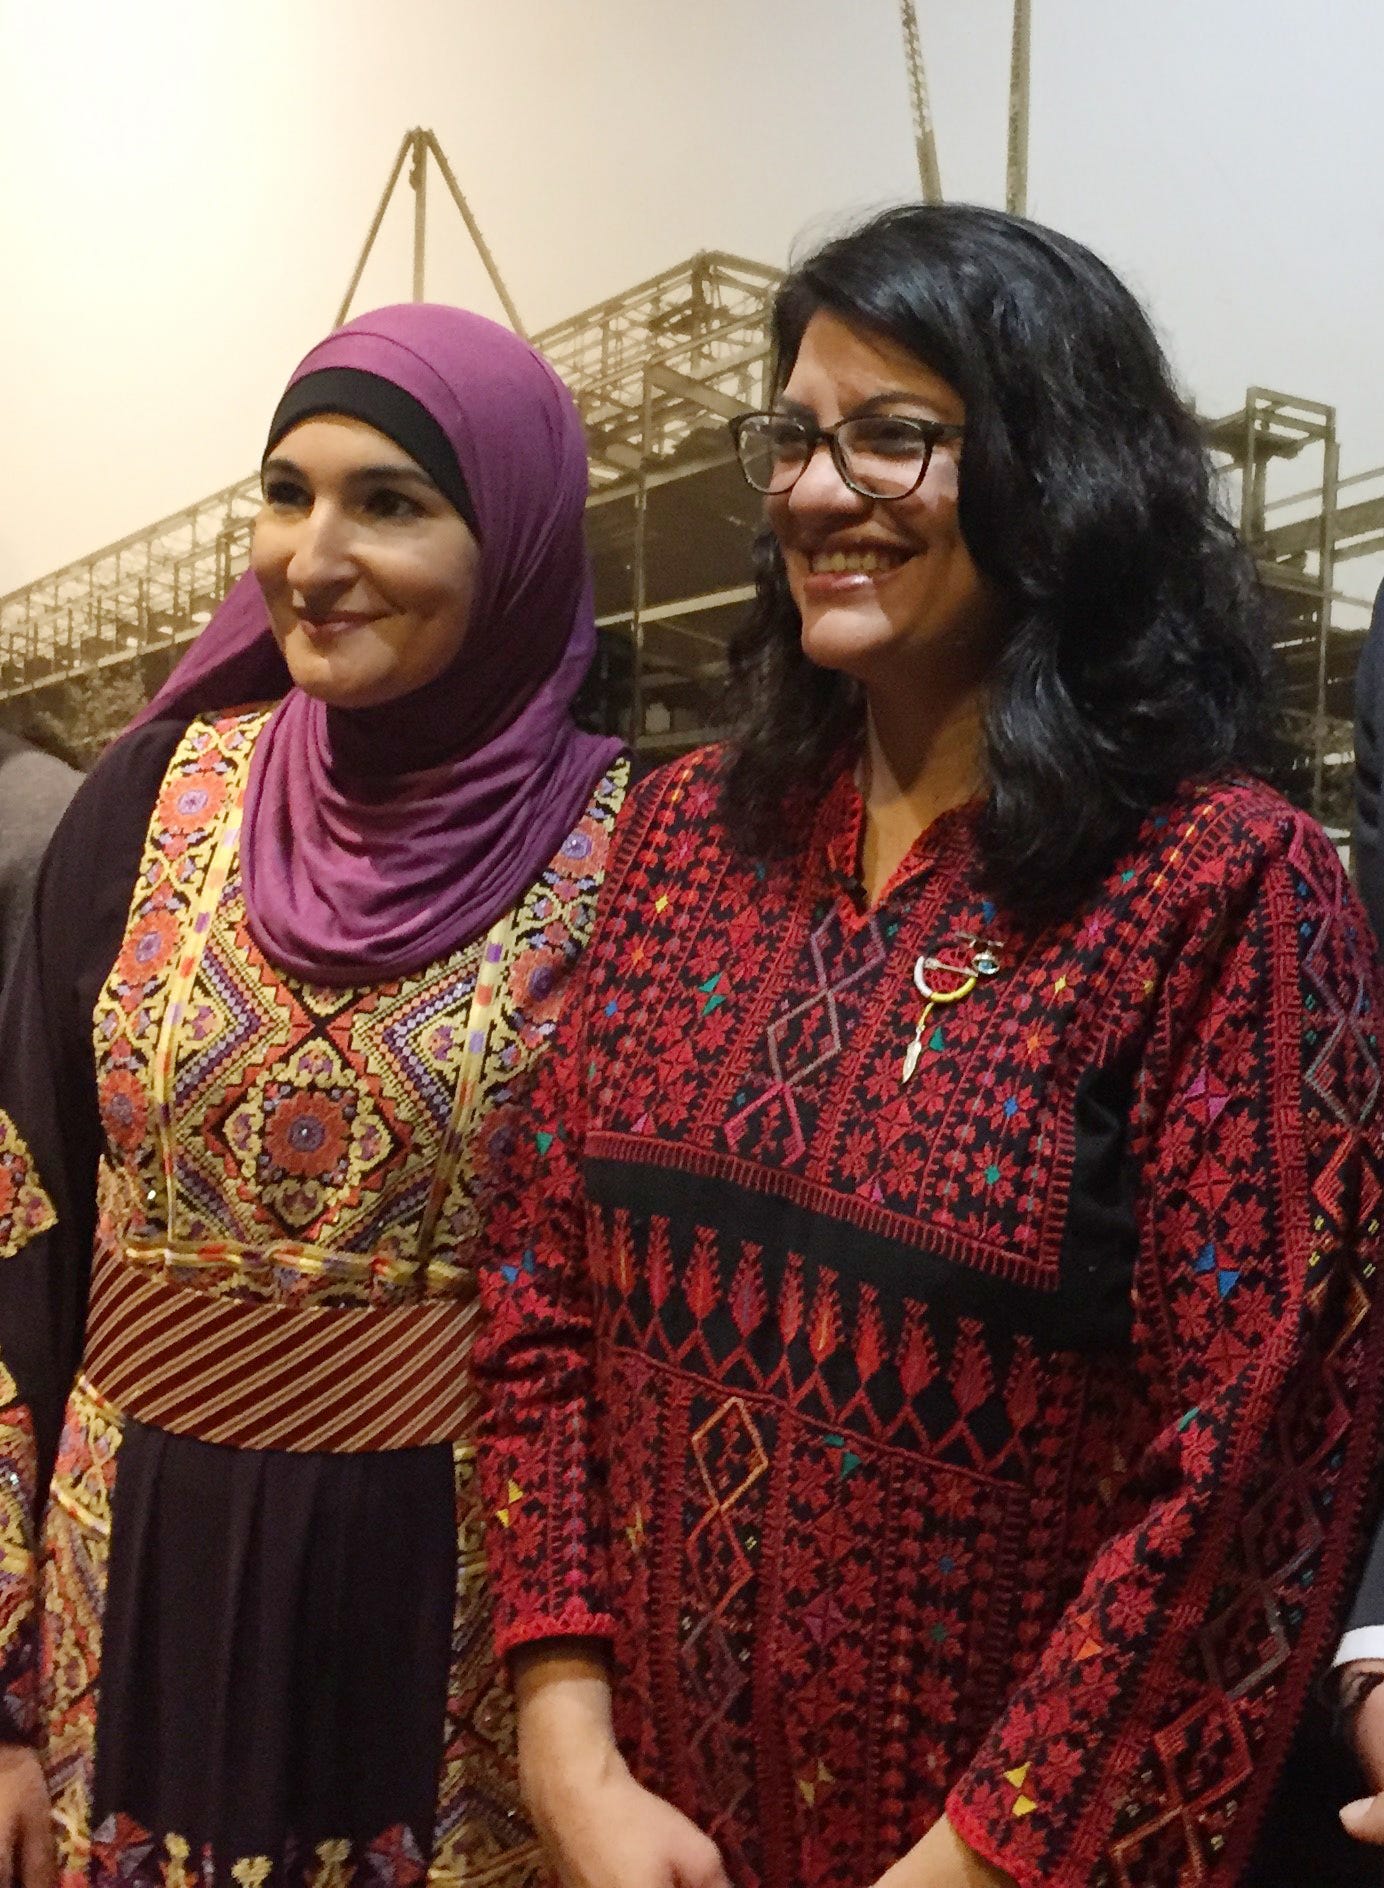 Both wearing Palestinian thobes, Rep. Rashida Tlaib poses for a photo with Linda Sarsour, a leader of the Women’s March, on Capitol Hill  in Washington D.C. on Thursday, January 3, 2019.